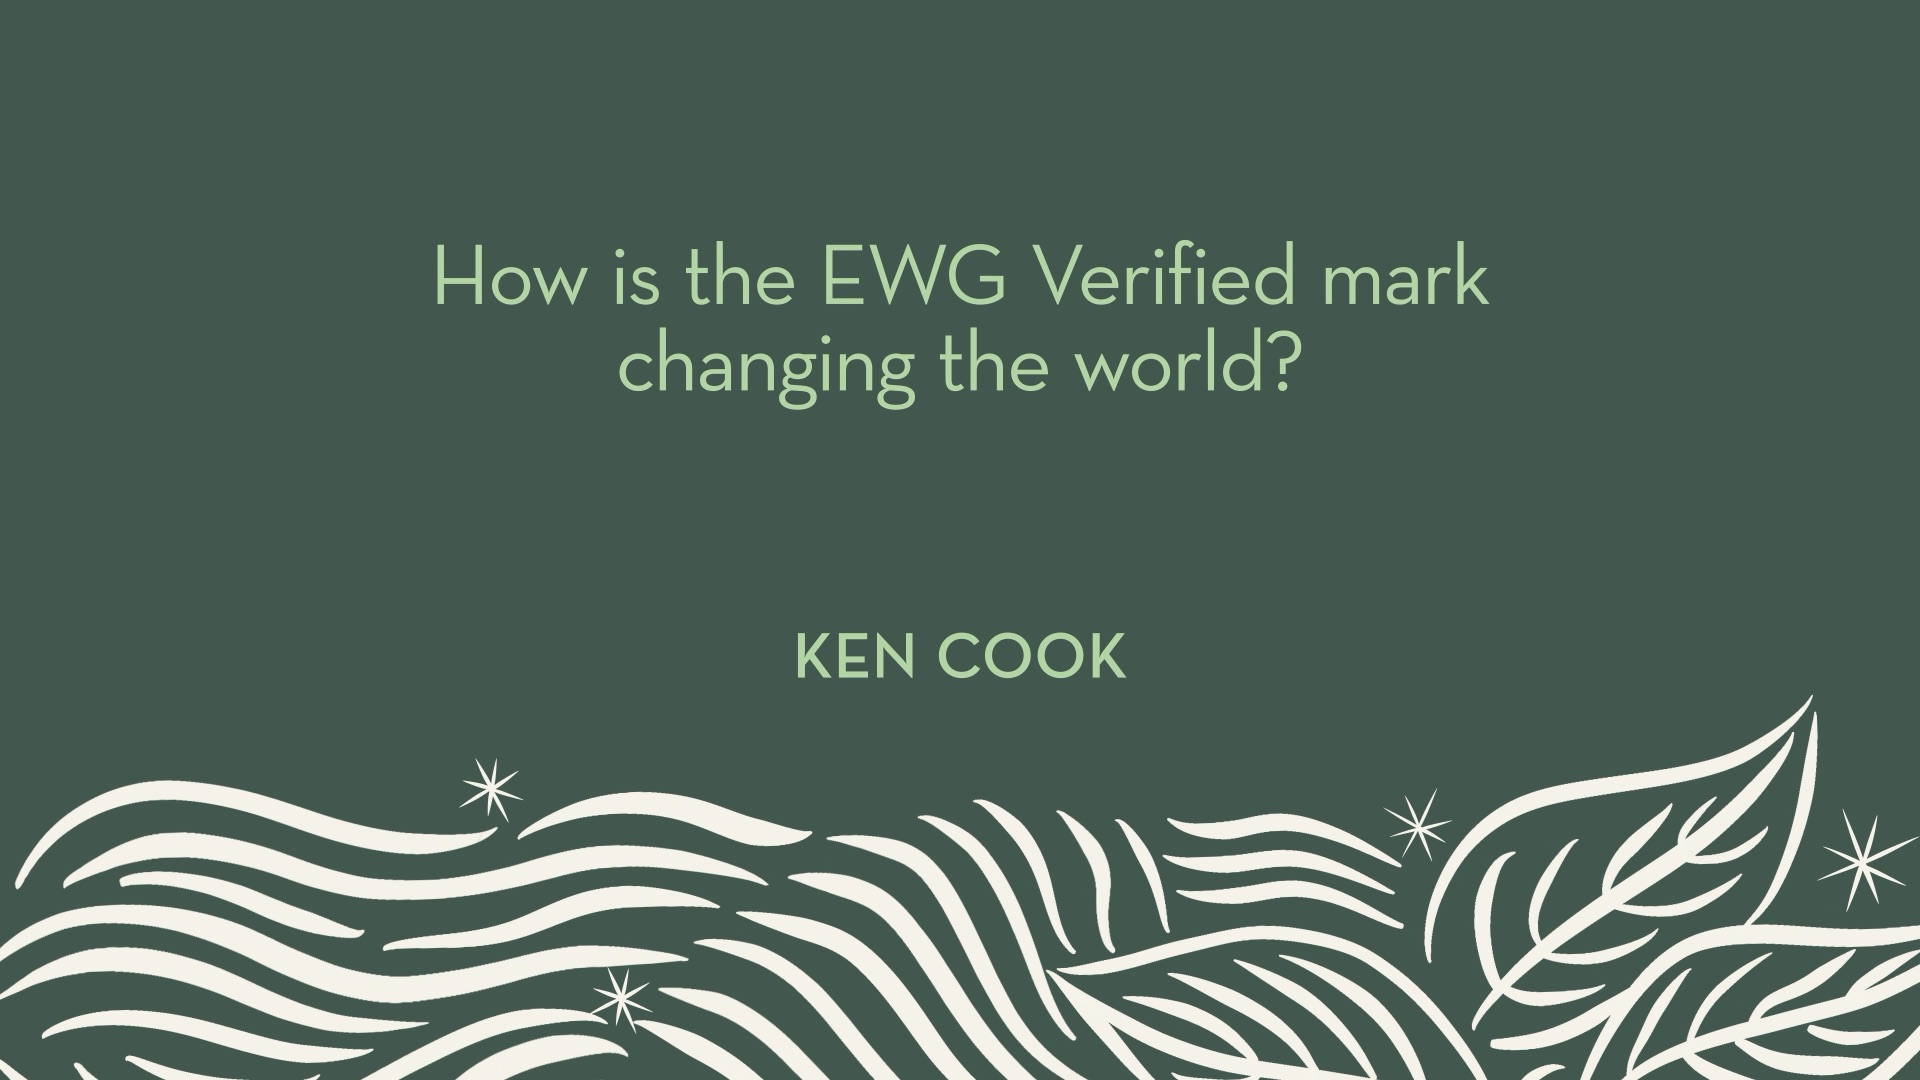 Ken Cook | How is the EWG Verified mark changing the world?